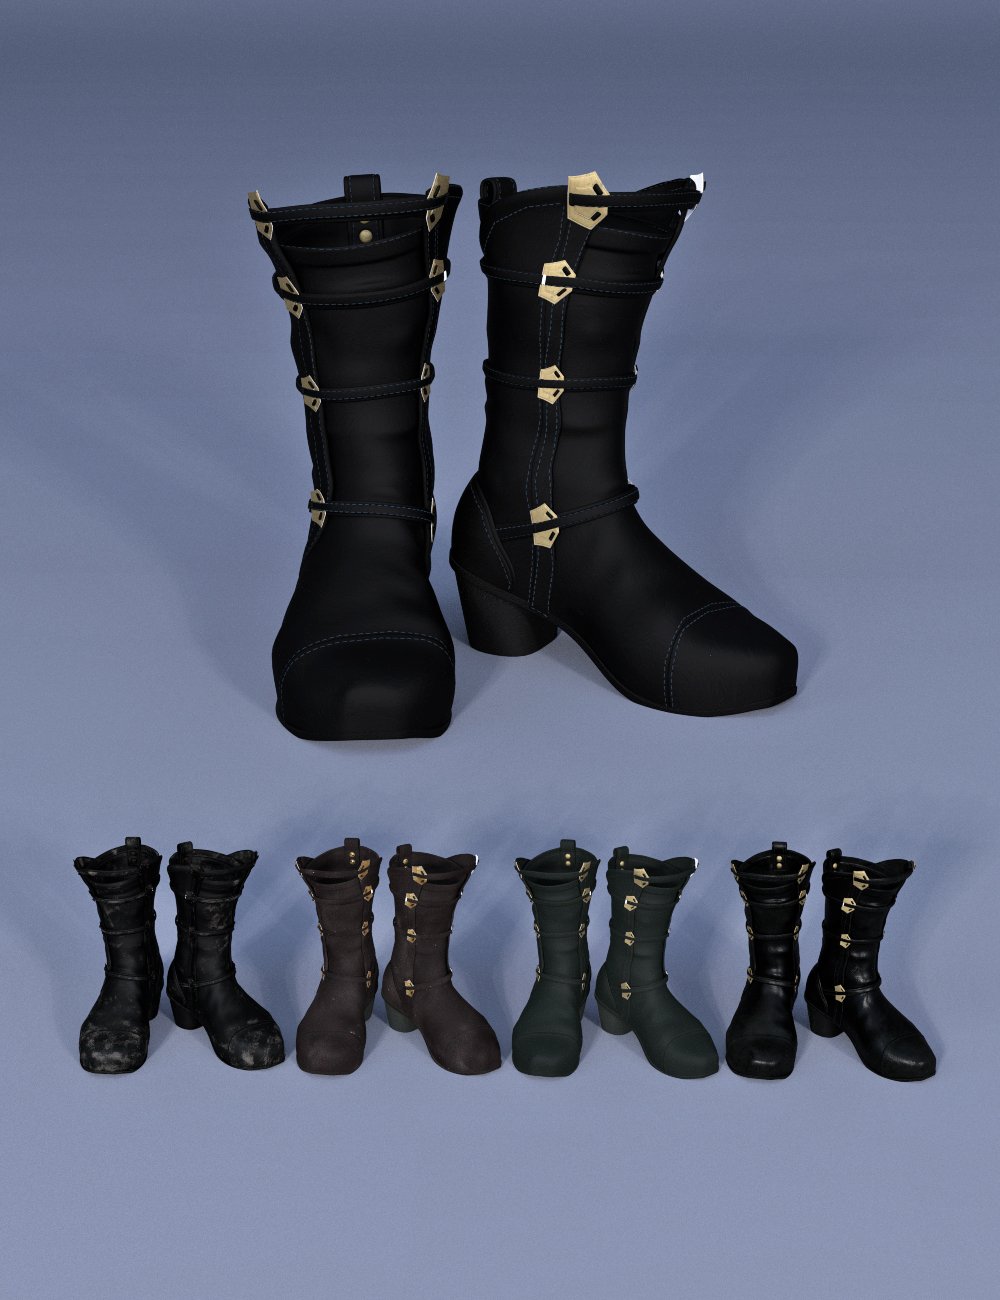 Futuristic Formal Outfit Boots for Genesis 8 and 8.1 Males | Daz 3D